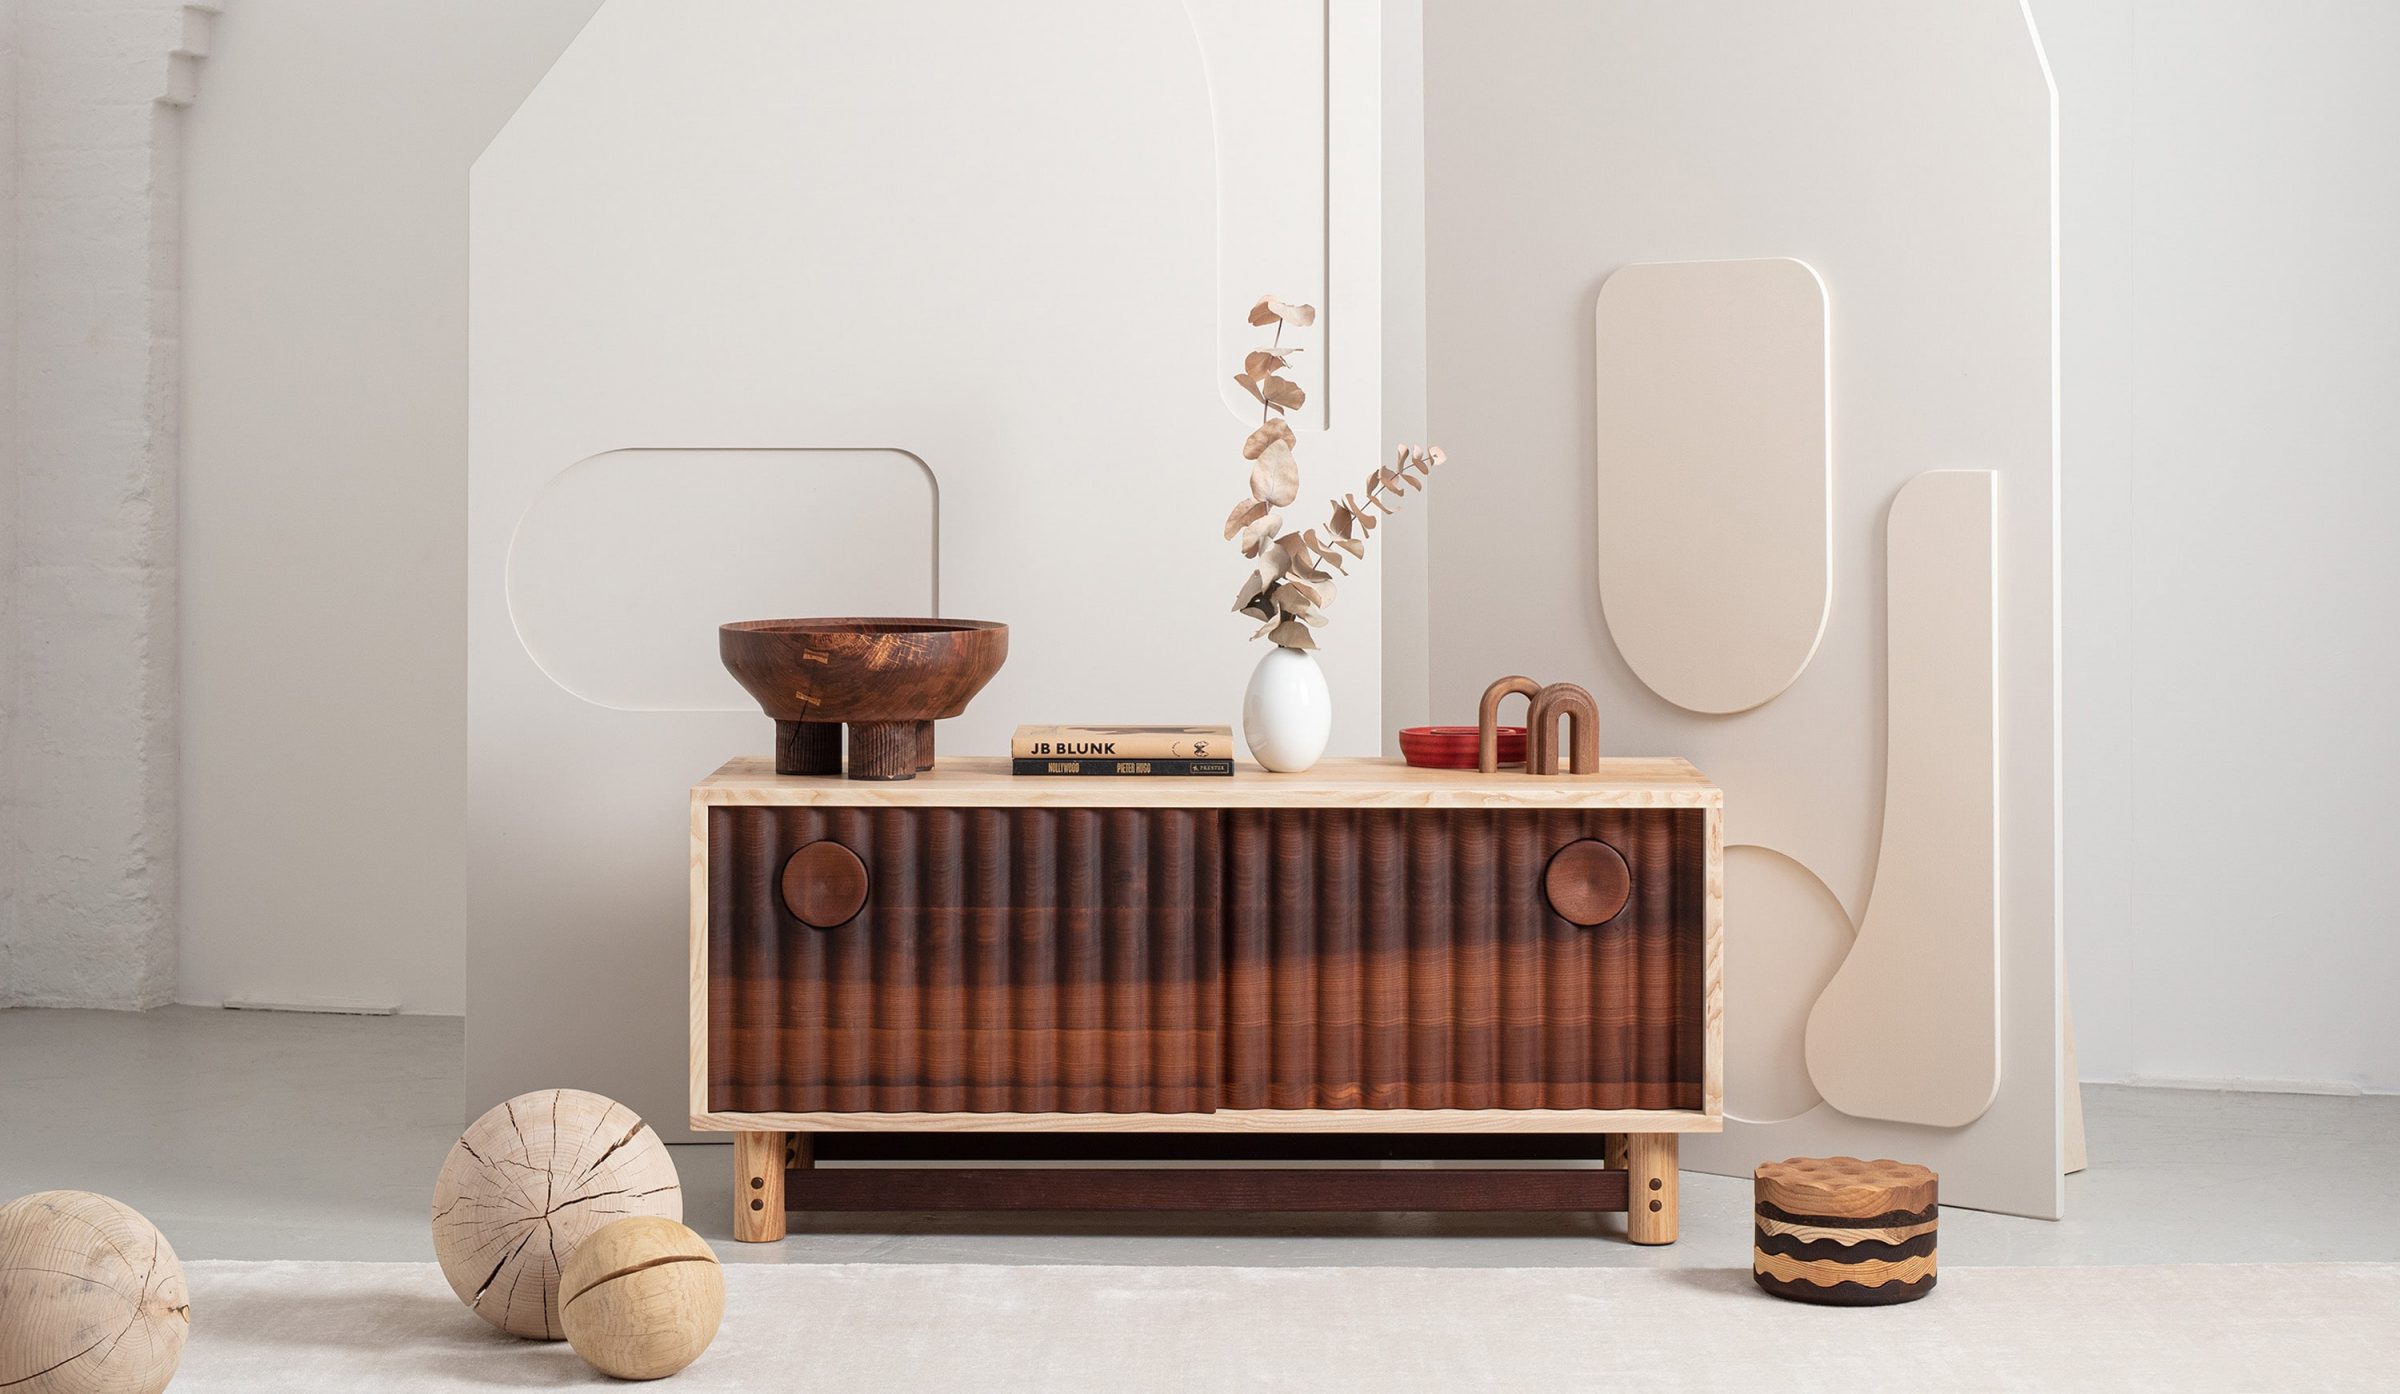 Jan Hendzel Studio Bowater range new collection with english baked ash and sycamore2 crop-min